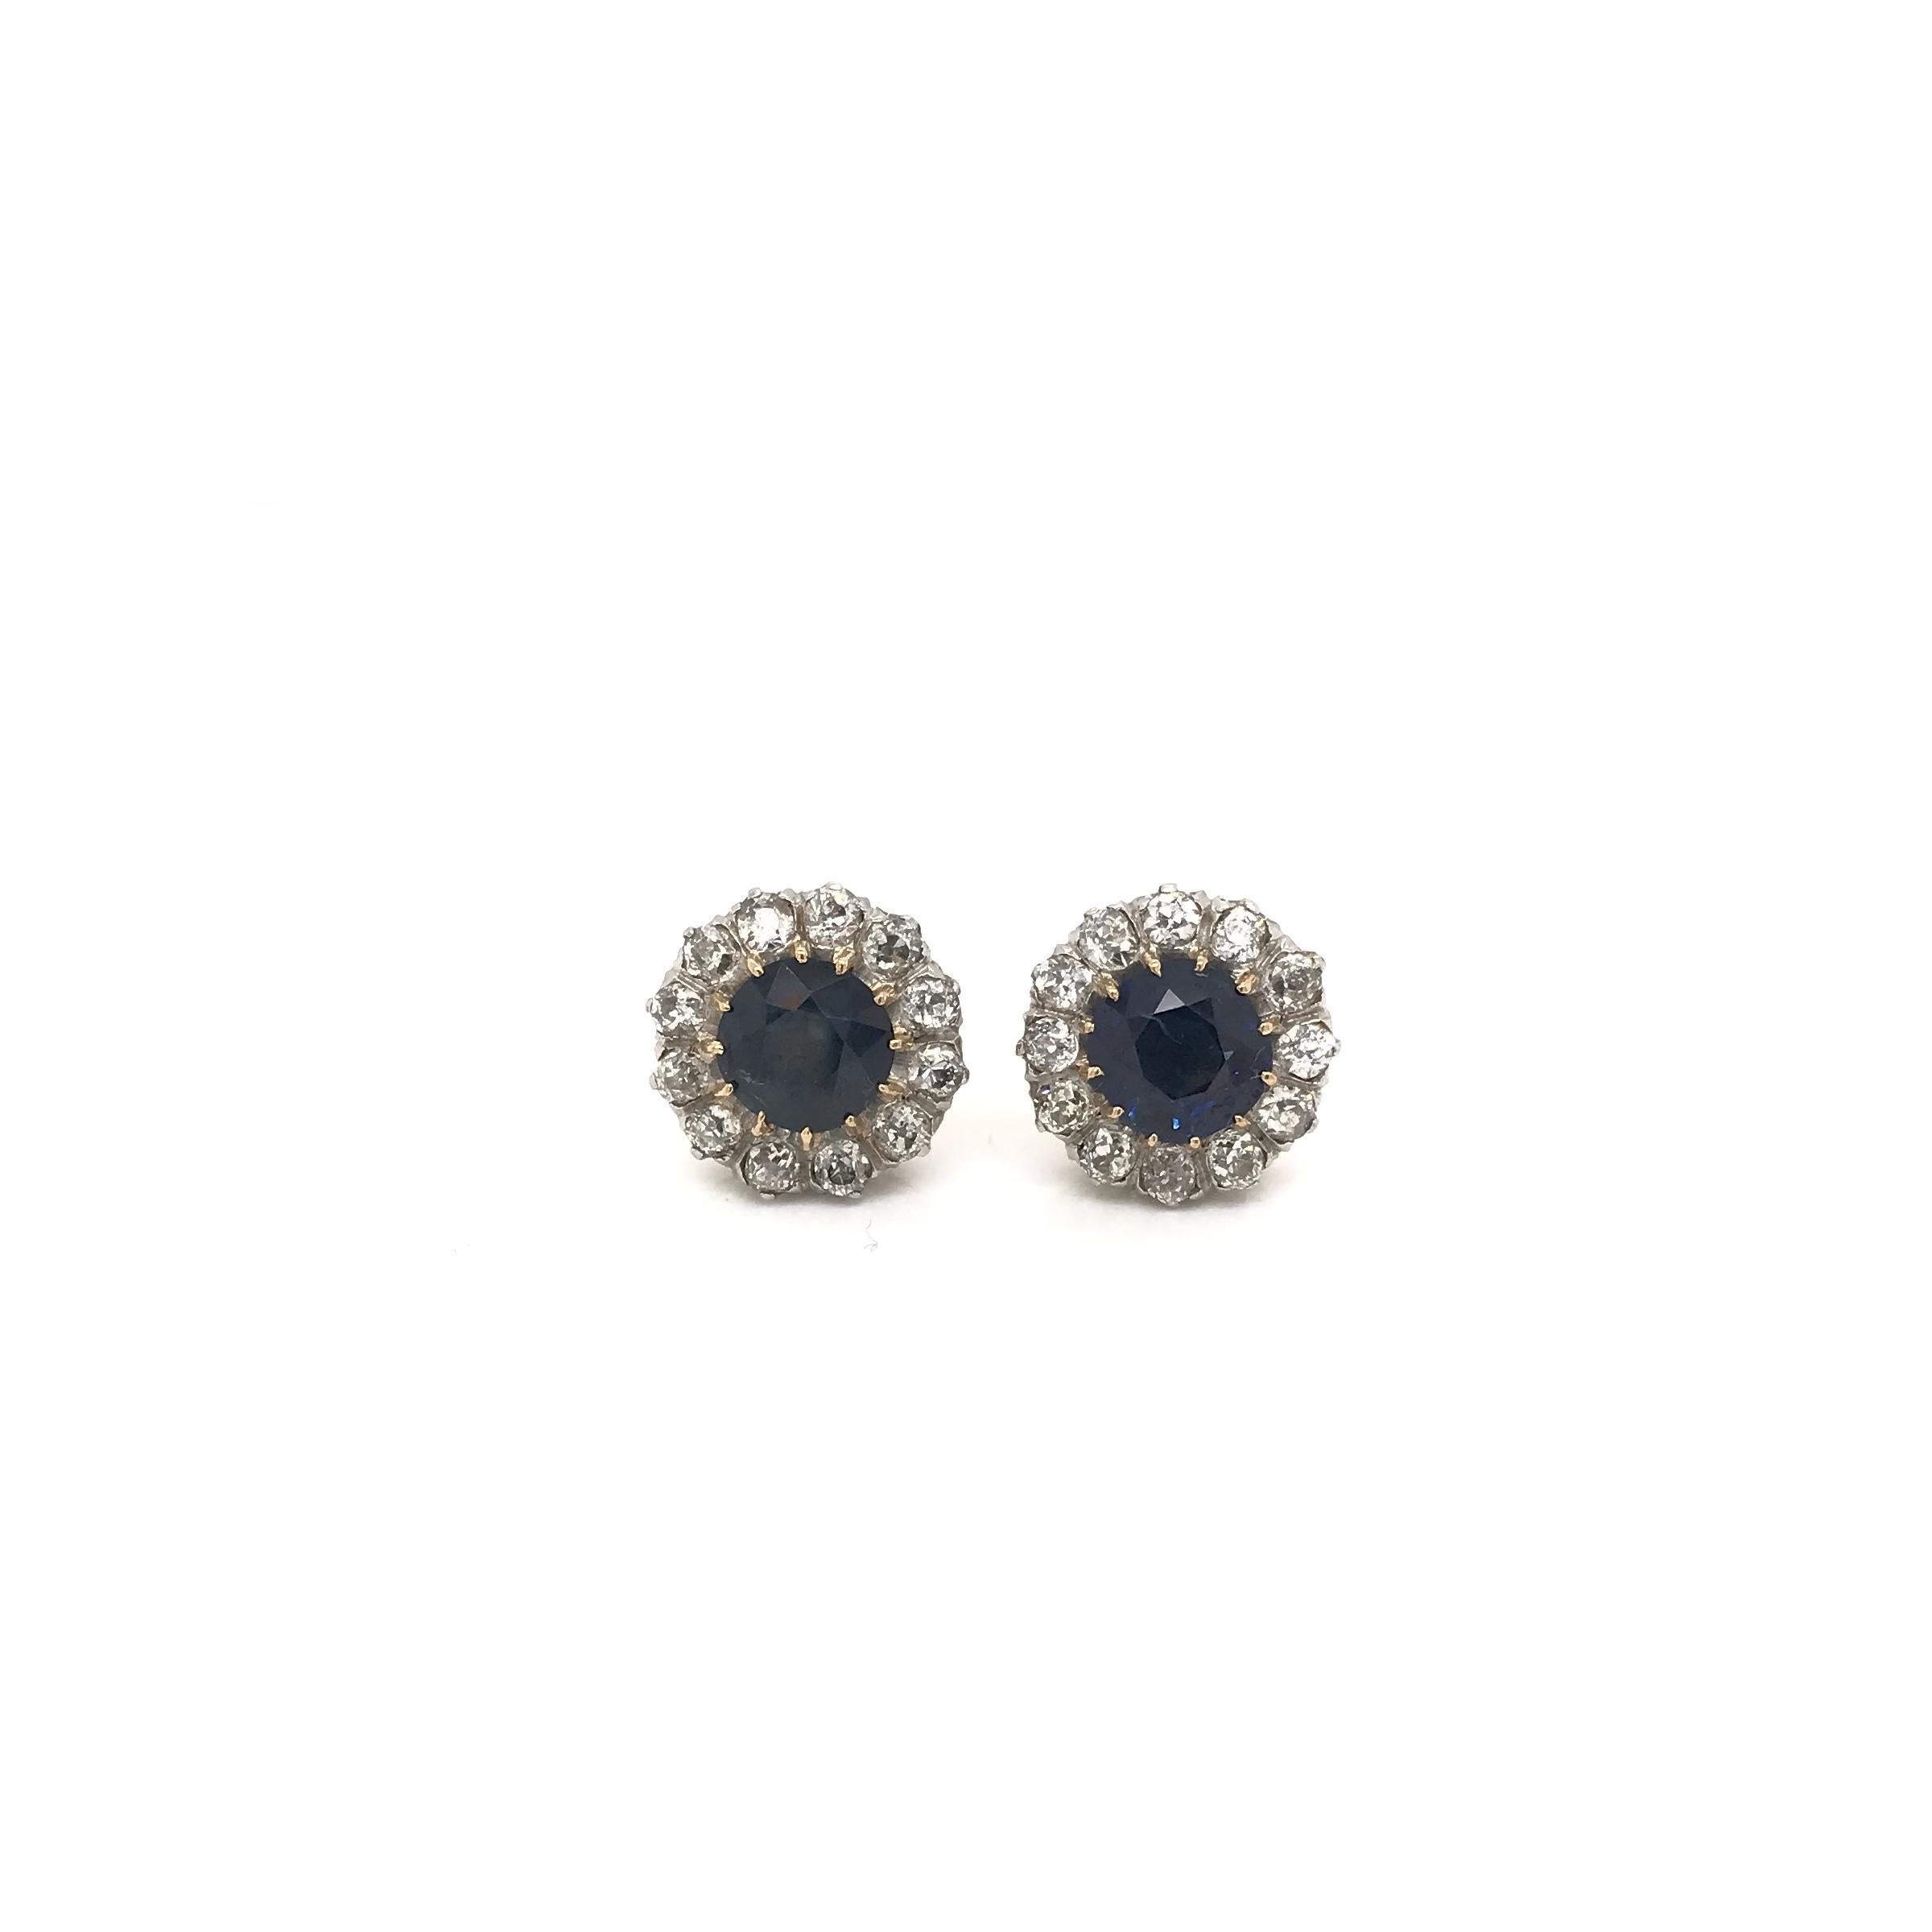 Antique Edwardian Sapphire and Diamond Earrings 1